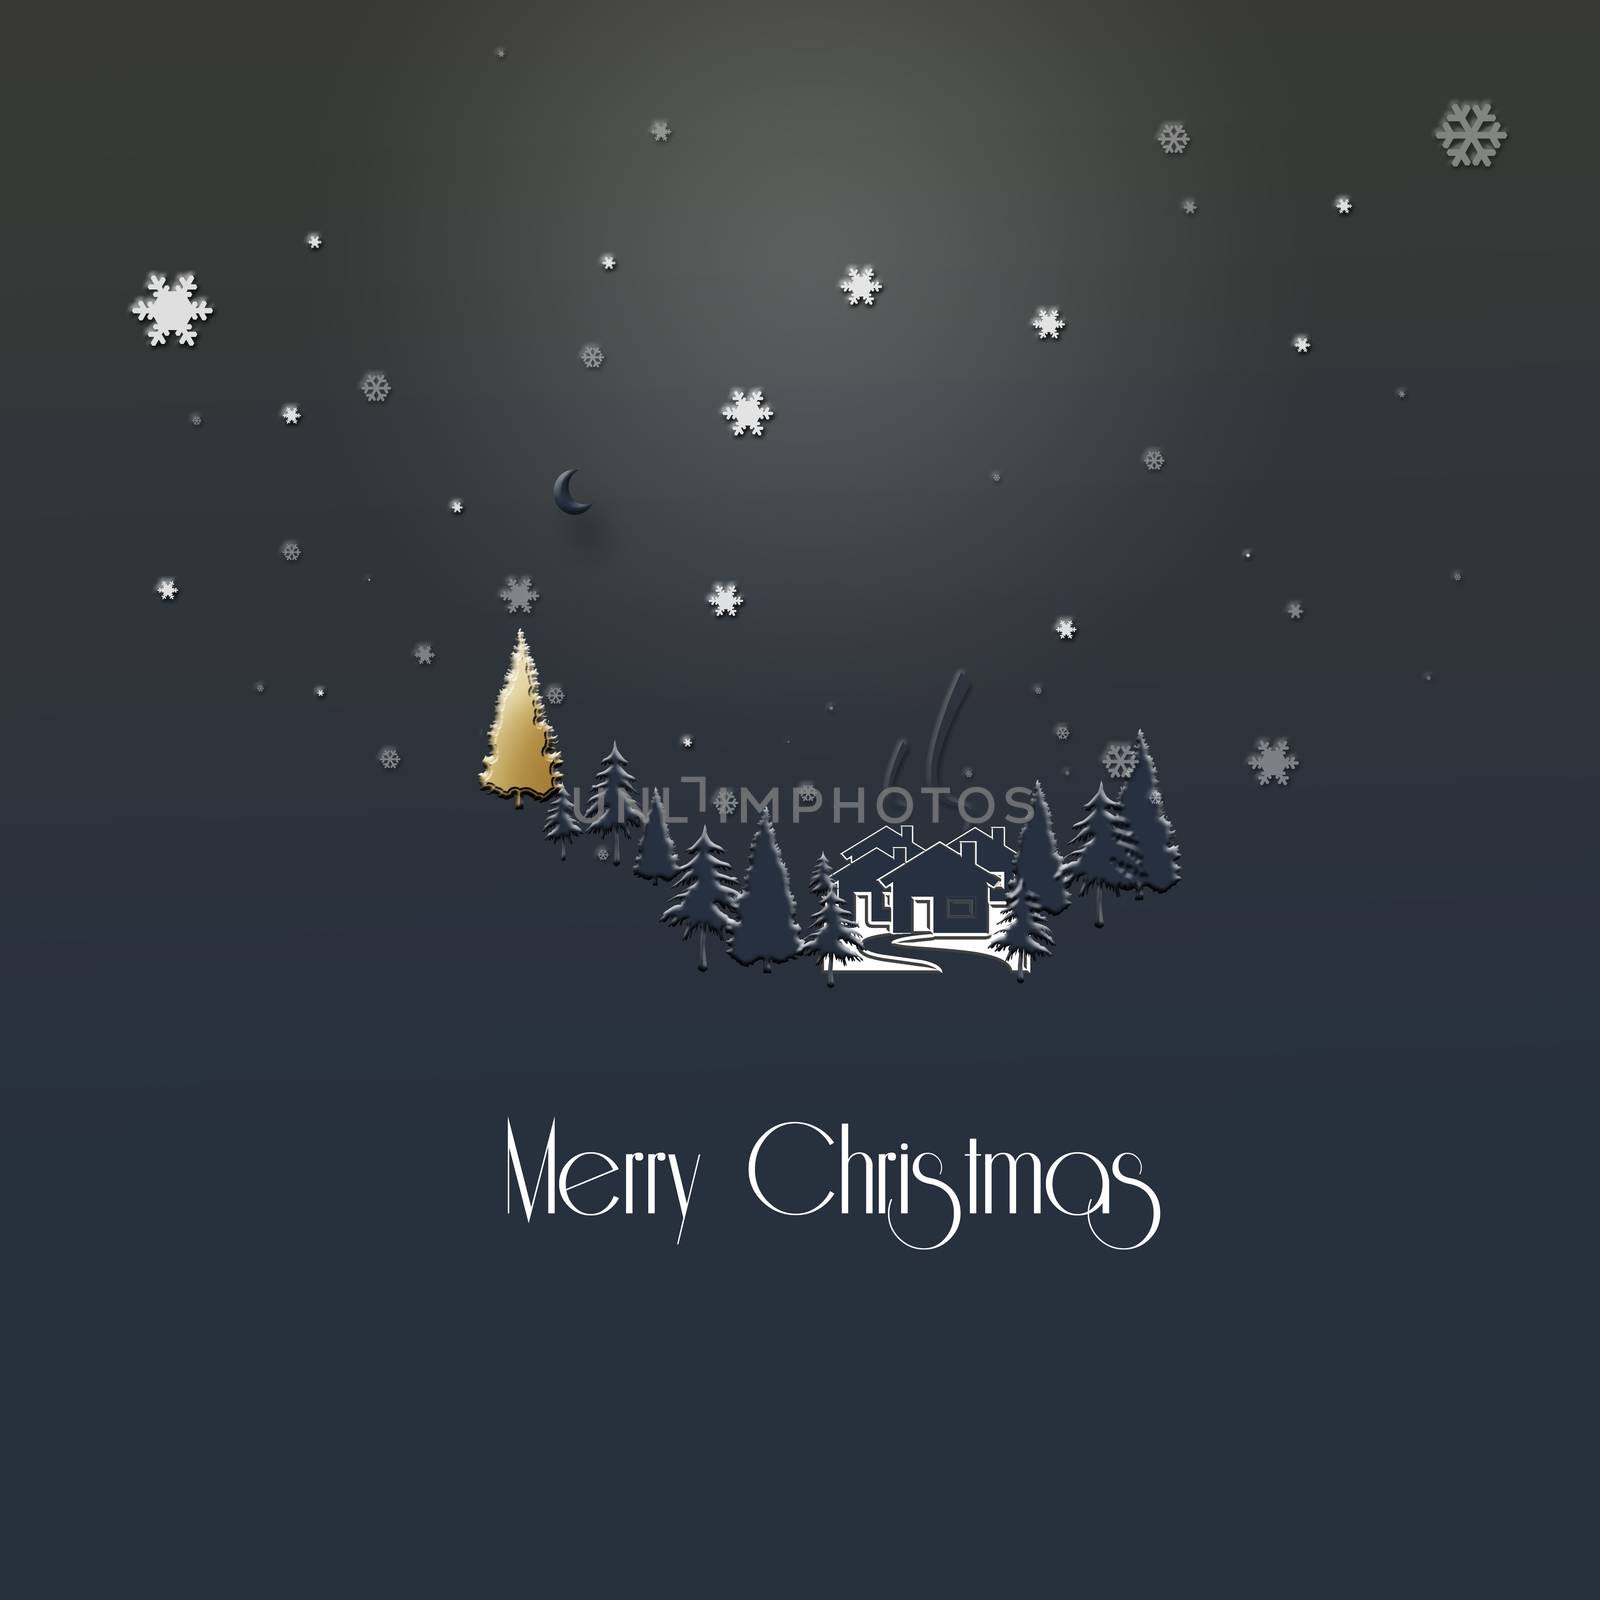 Beautiful stylish minimalist Christmas 2021 New Year winter night landscape with snowflakes, houses, firs, gold Christmas tree on dark blue background. Merry Christmas text. 3D Illustration